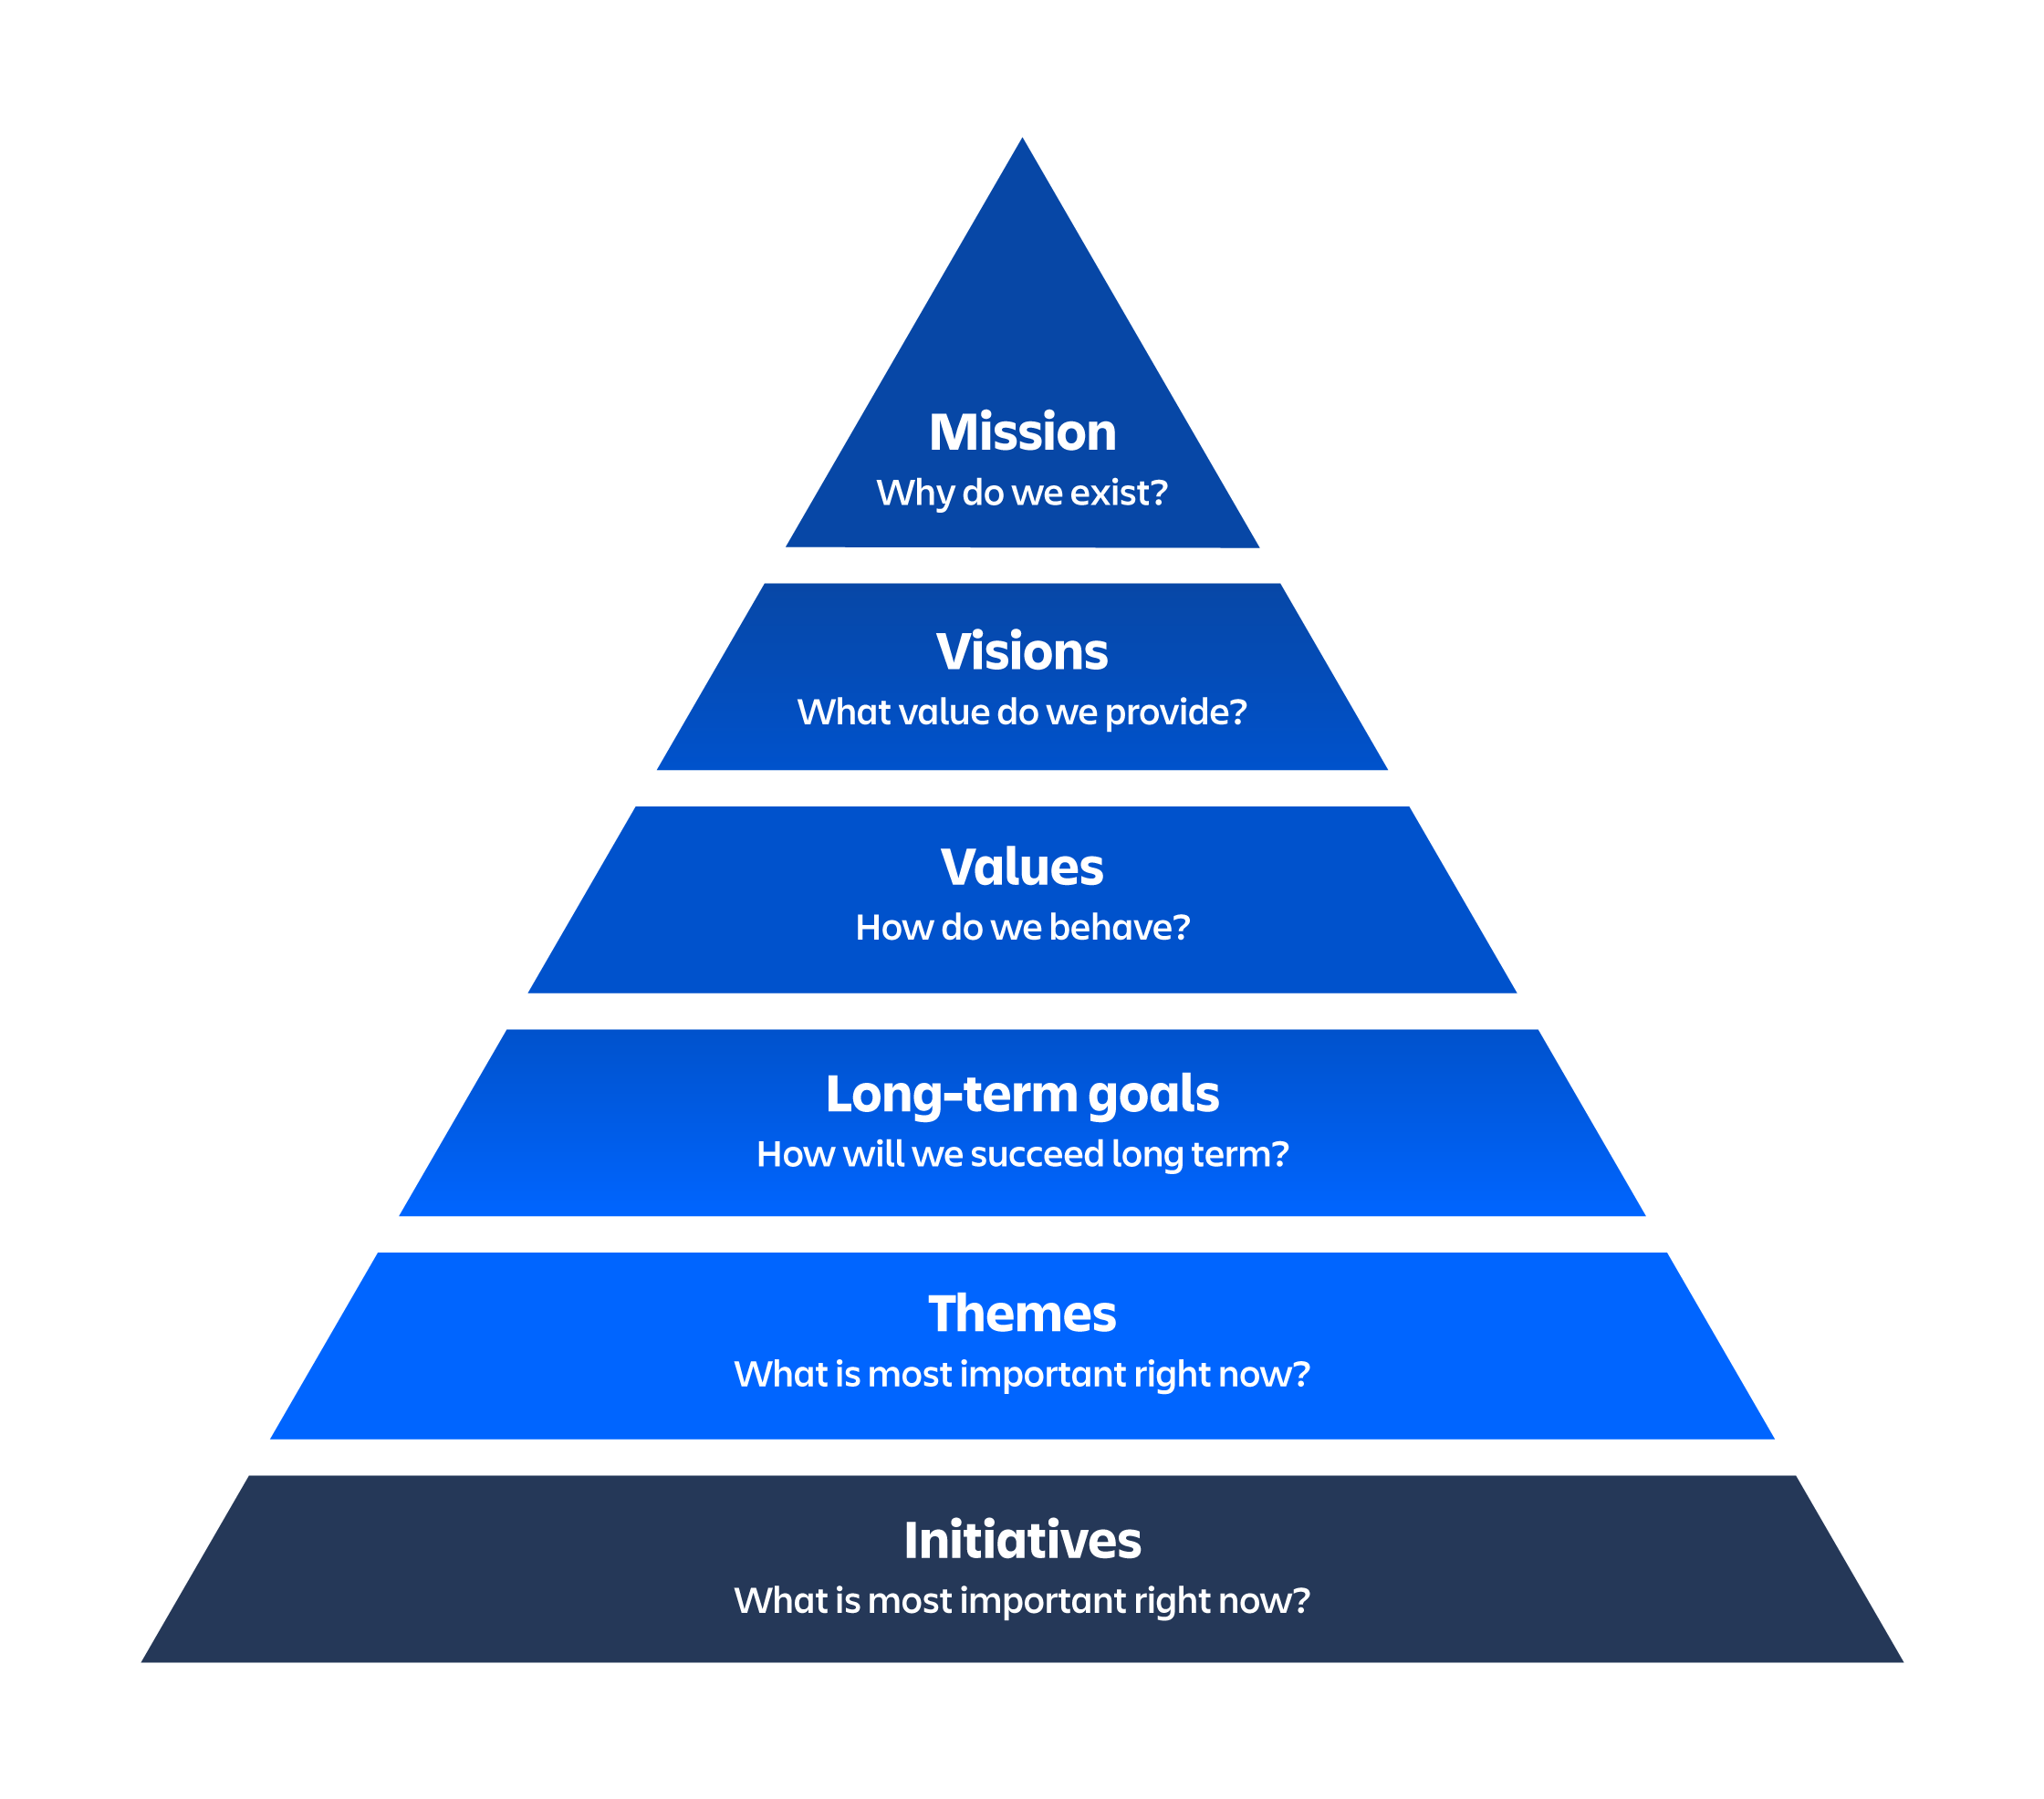 Lean portfolio management pyramid with mission at the top and initiatives at the base